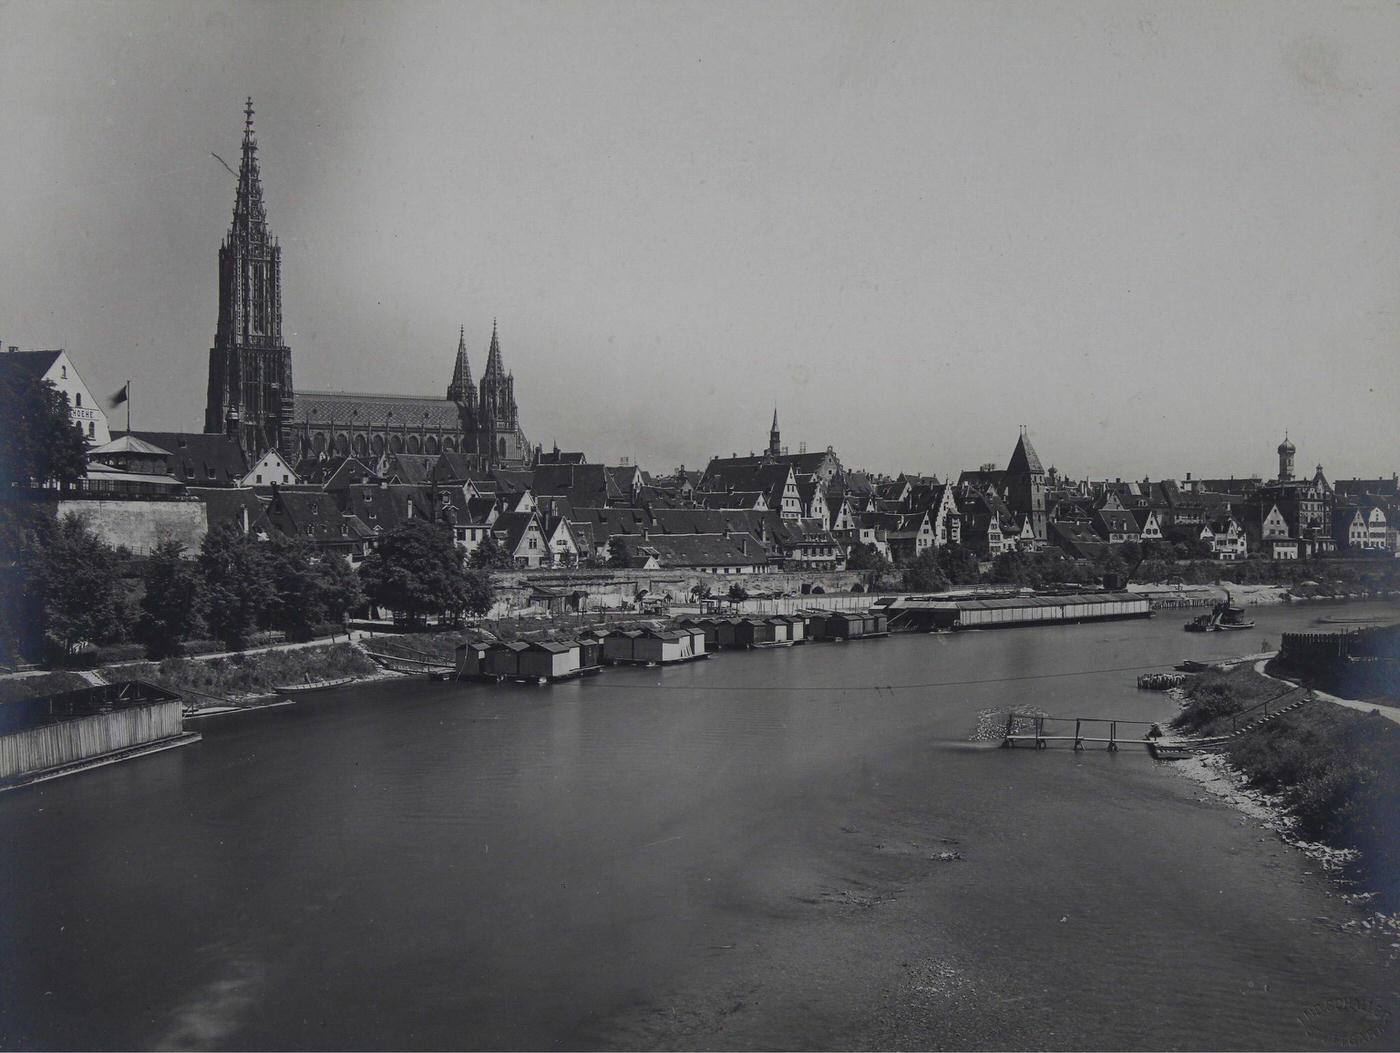 City of Ulm, View over the Danube to the City, 1895